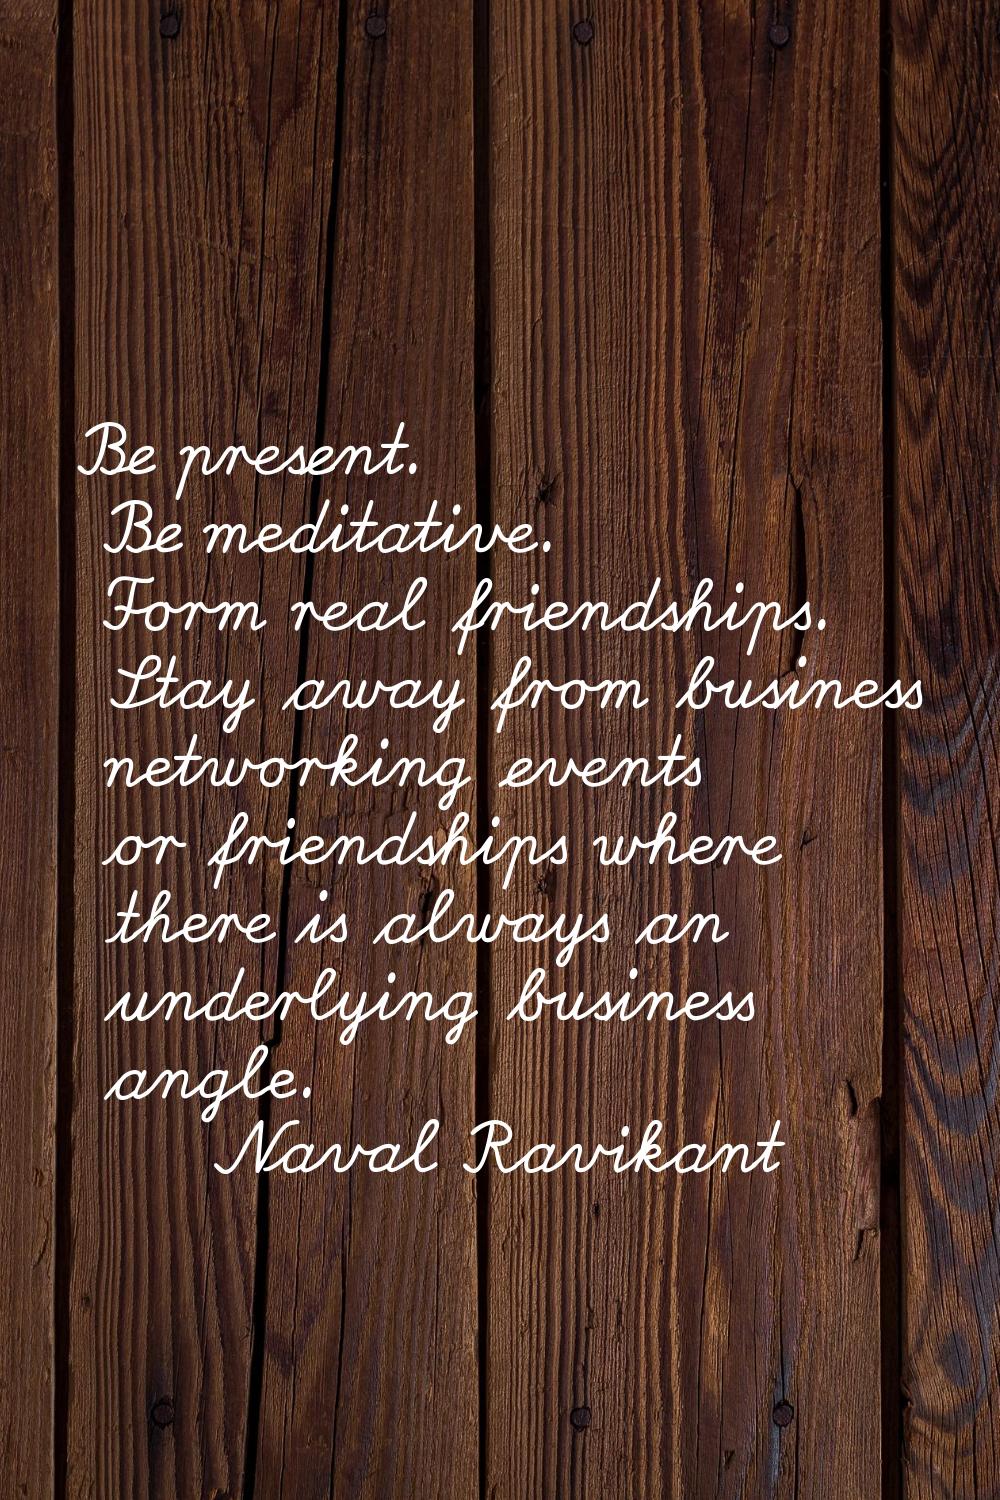 Be present. Be meditative. Form real friendships. Stay away from business networking events or frie